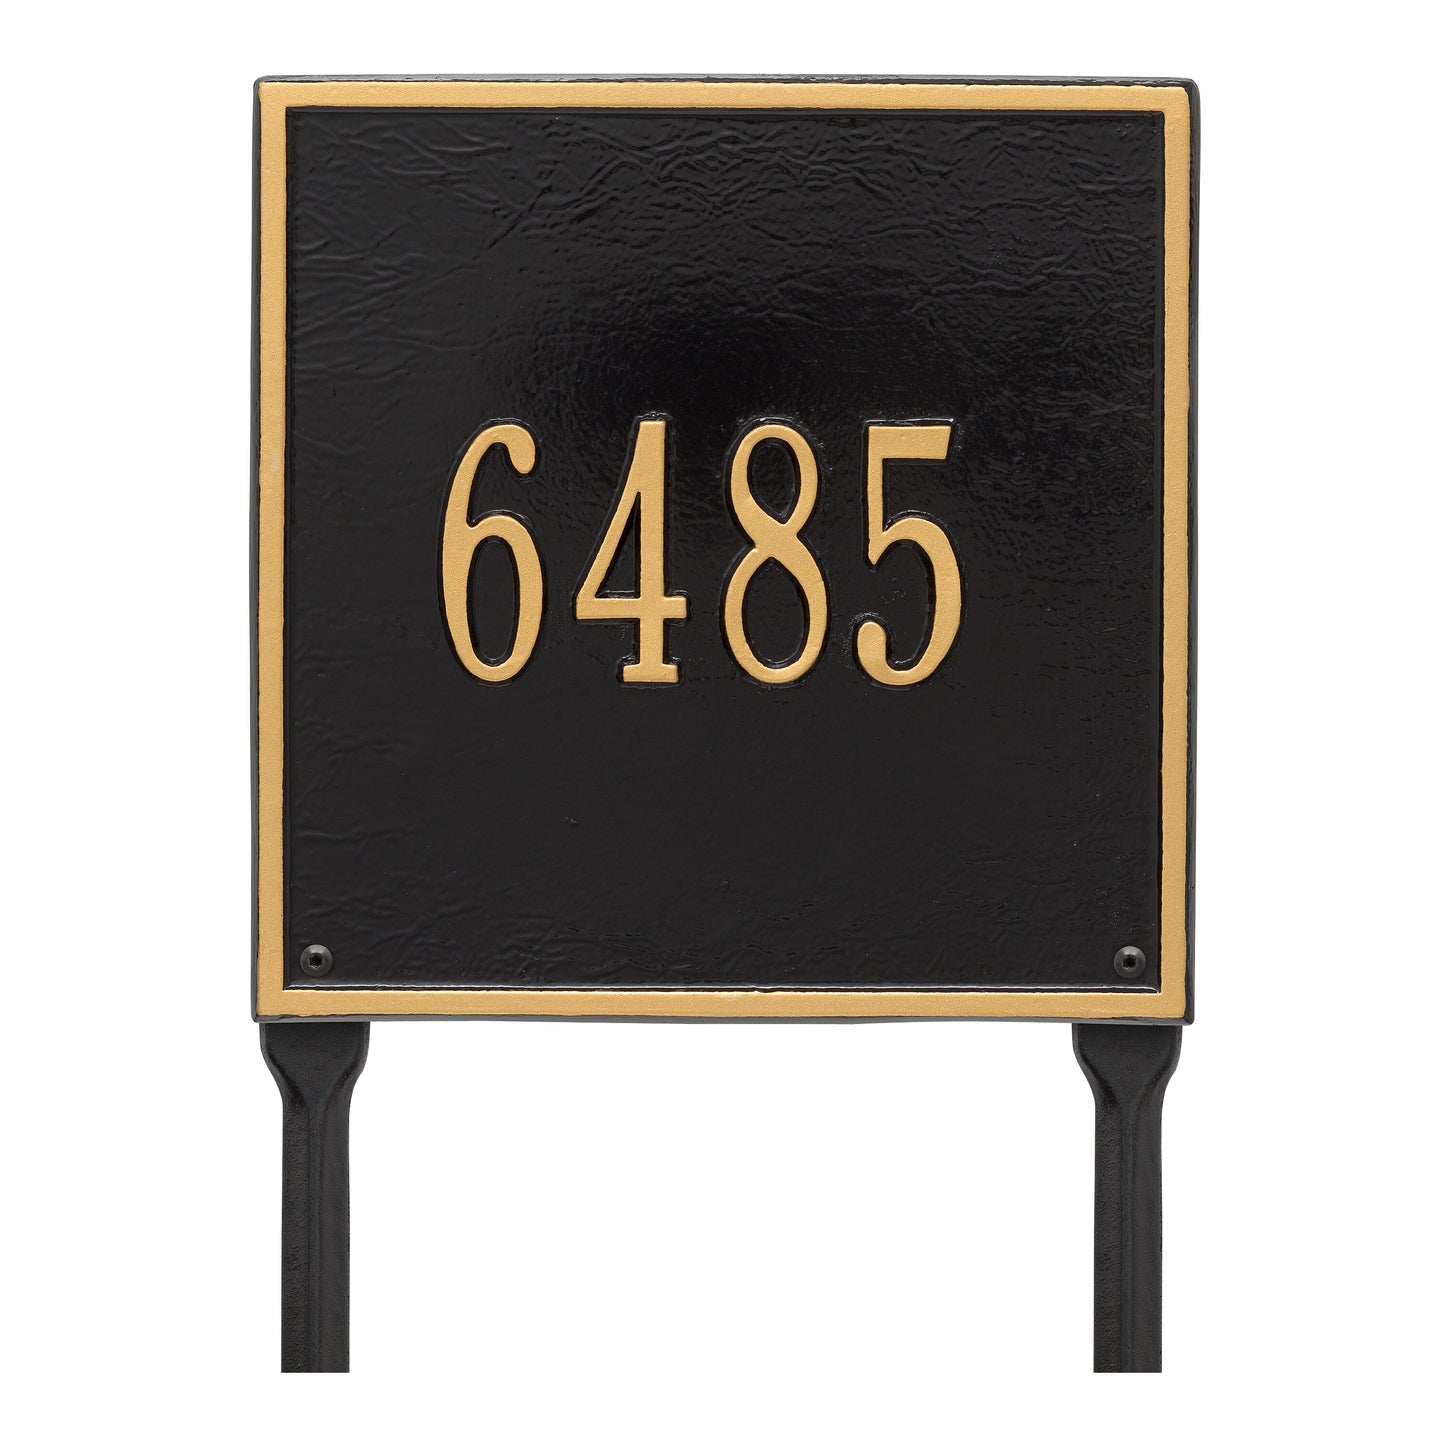 Whitehall Products Personalized Square Standard Lawn Plaque One Line Black/silver